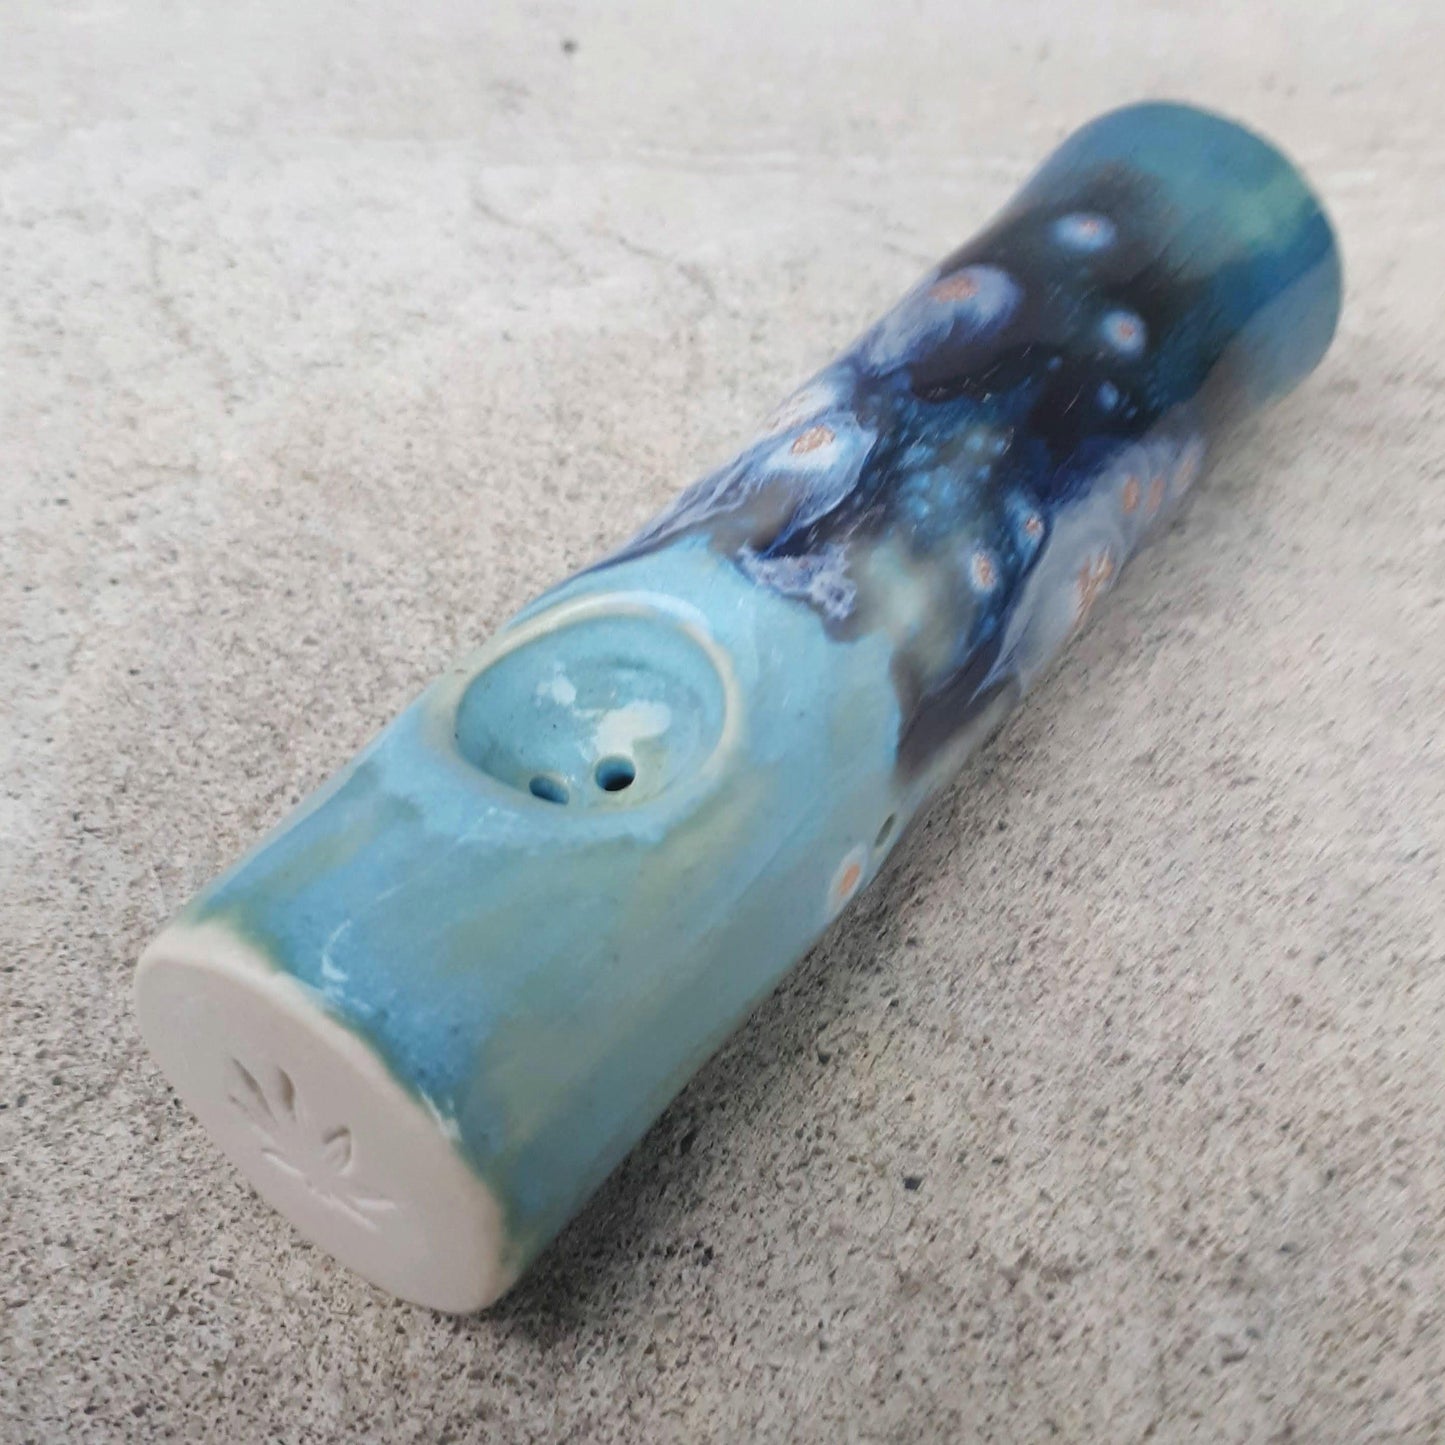 Side view of Blue Dream original cannabis pipe with hole on side